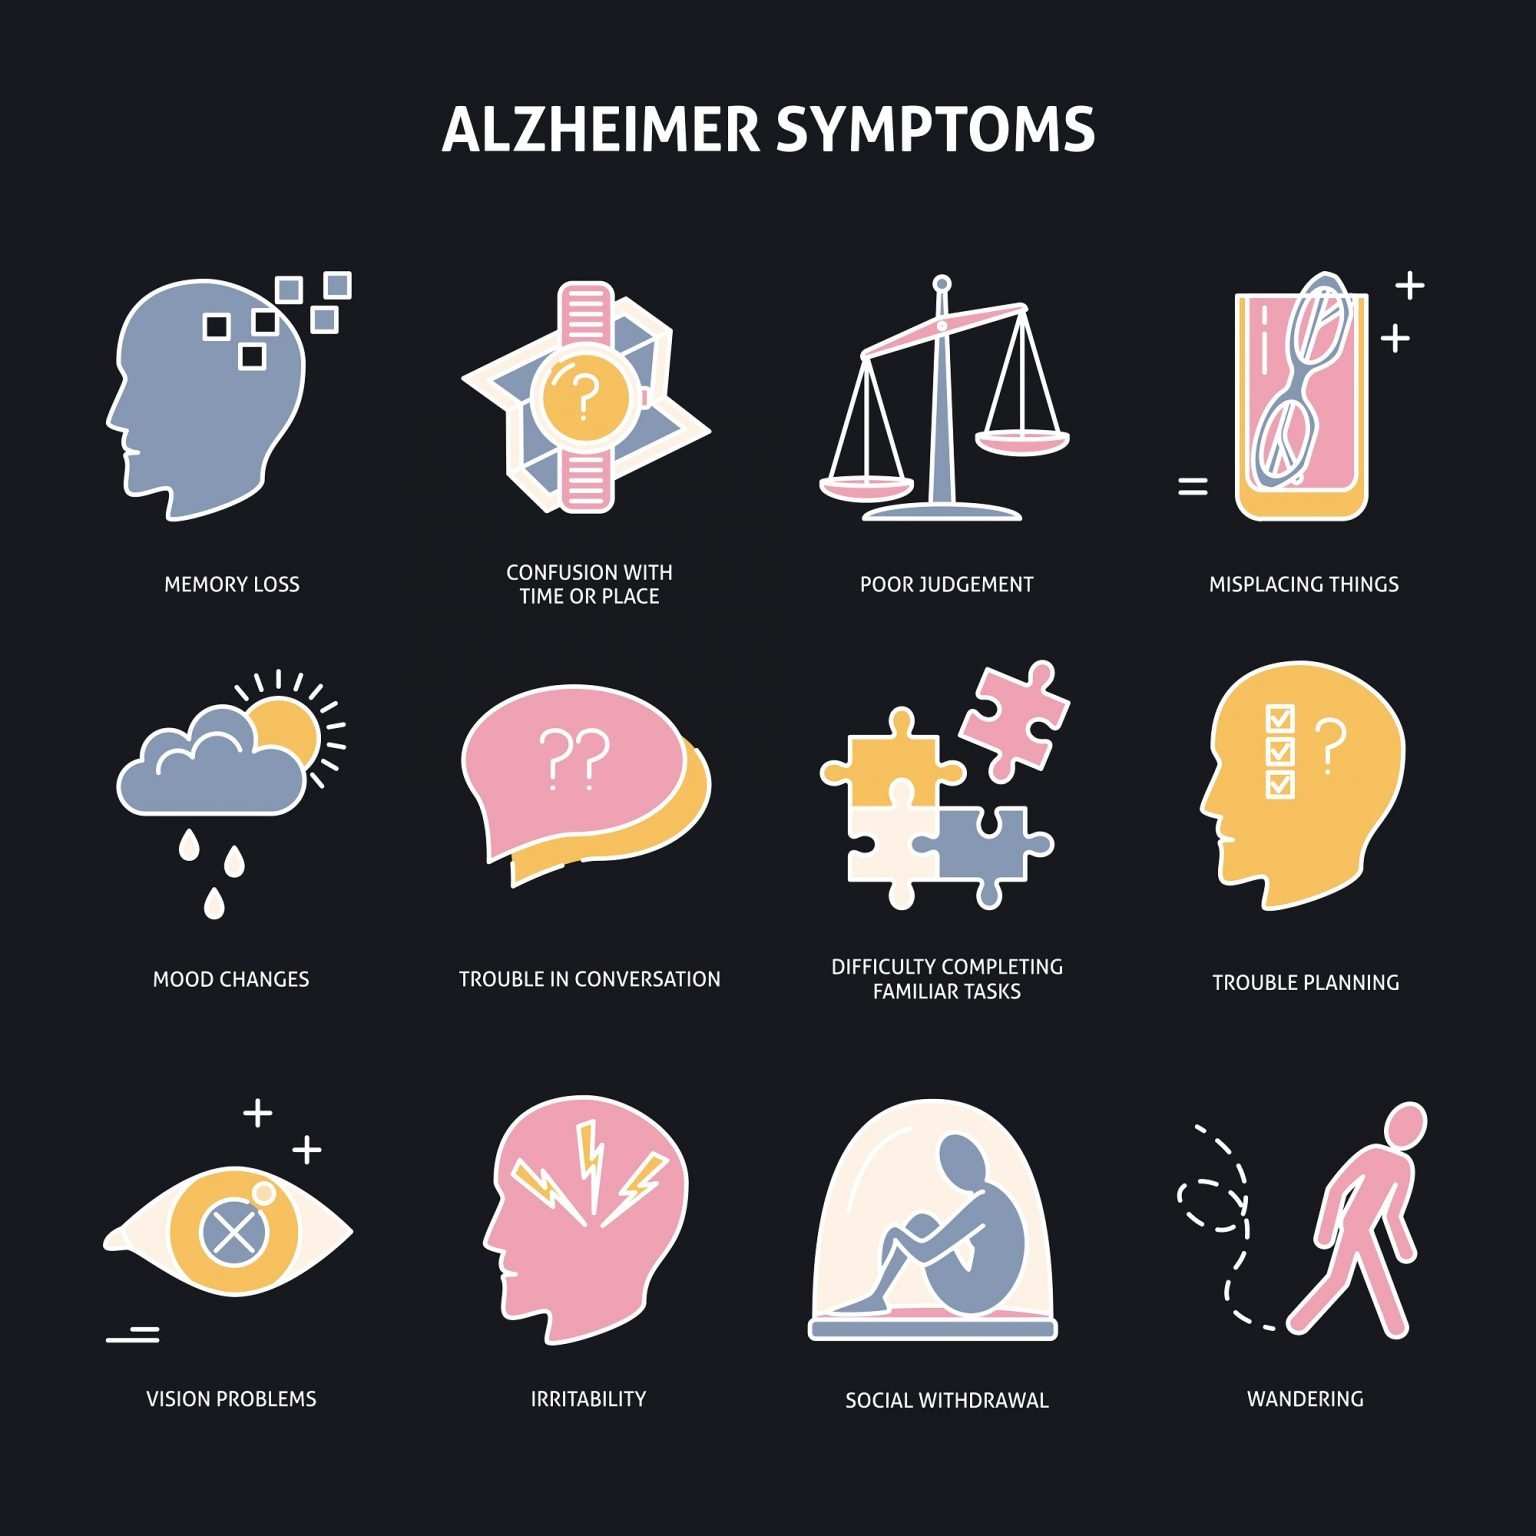 Warning signs of Alzheimers disease